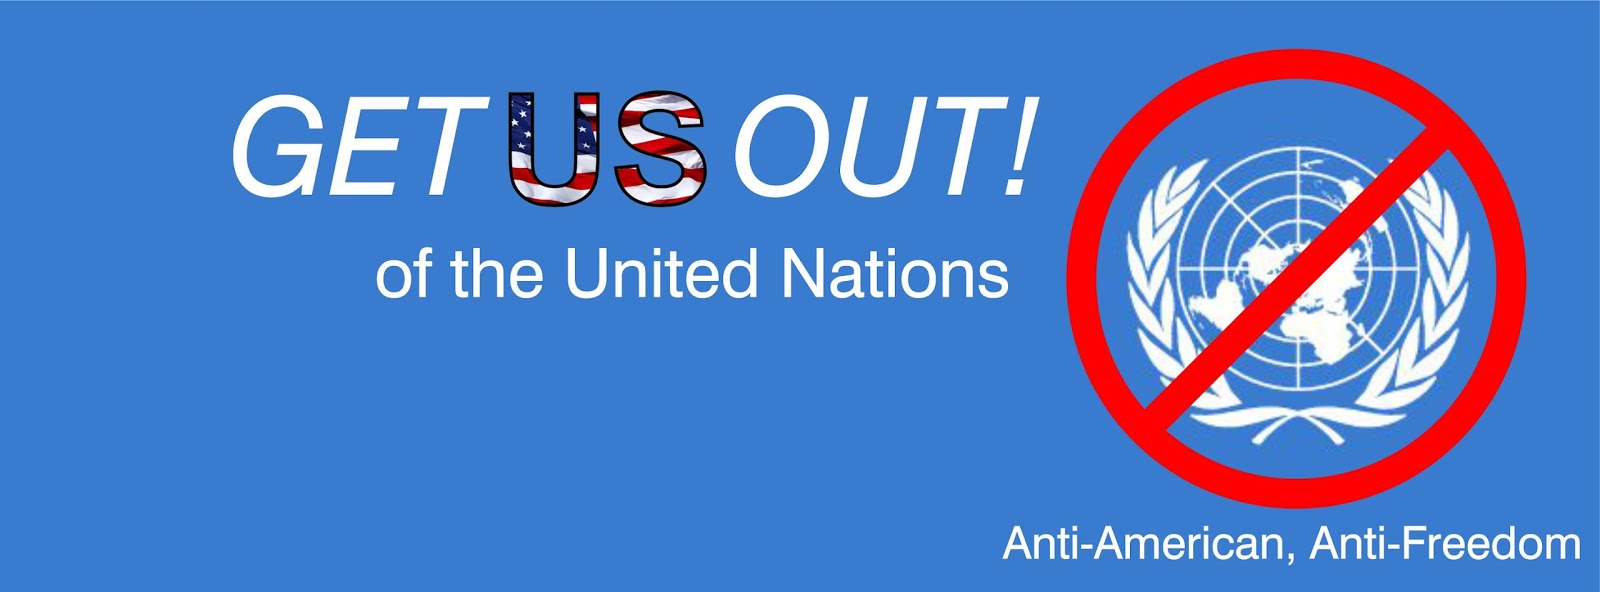 GET-US-OUT_of_the_United_Nations_1.jpg